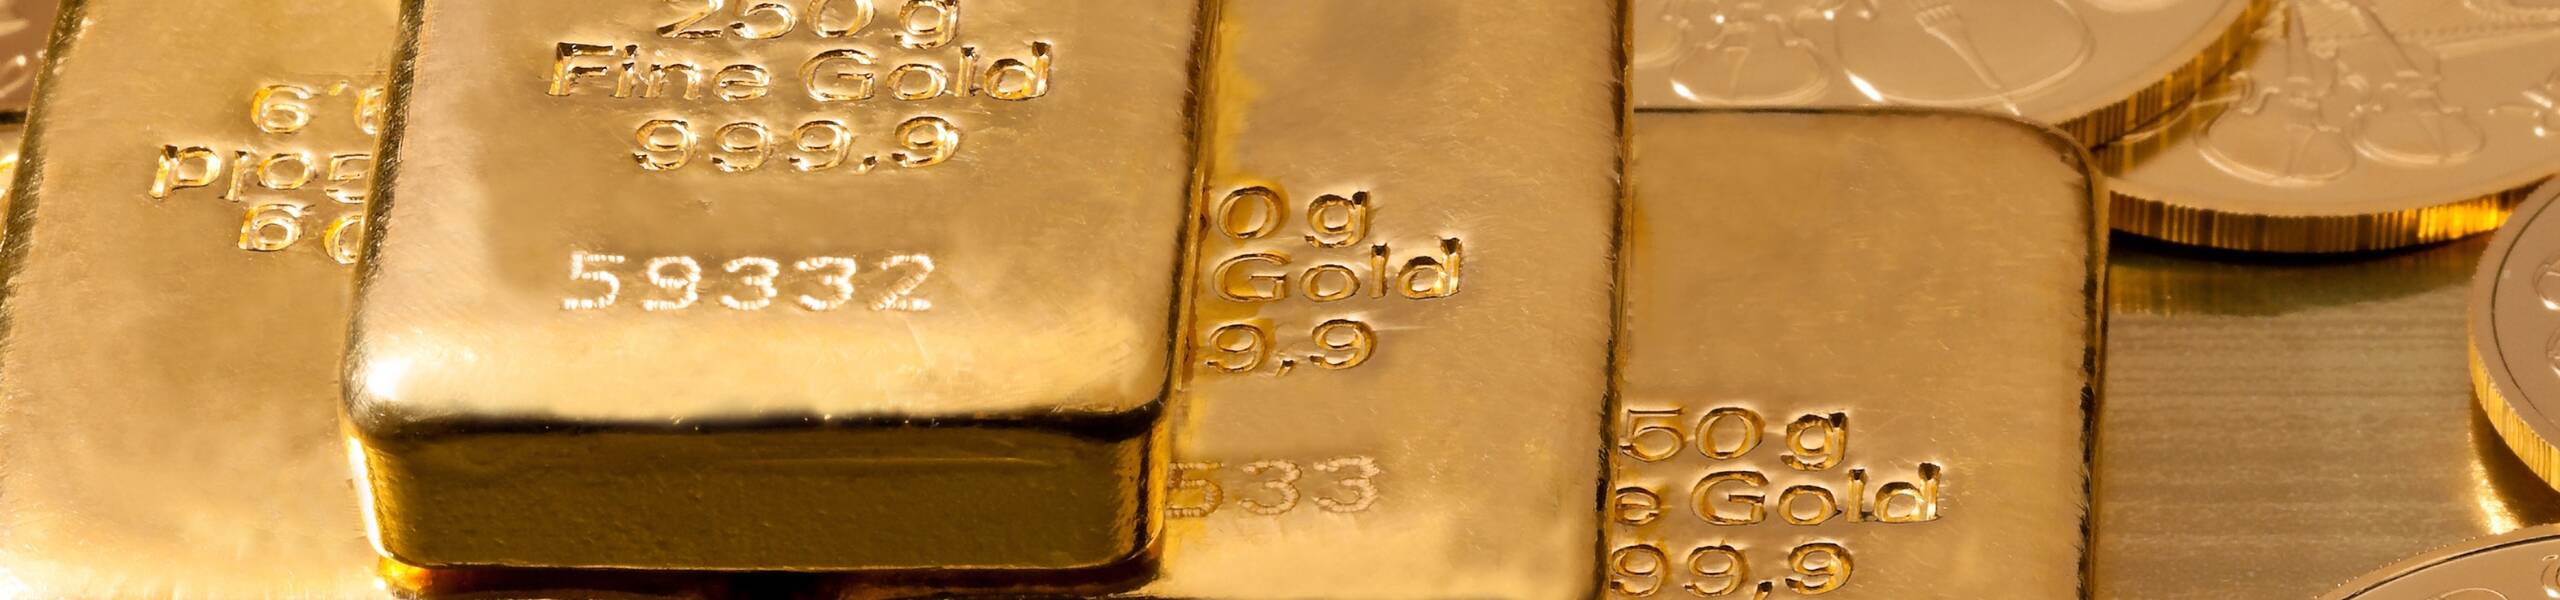 GOLD: price consolidating along 'Window'